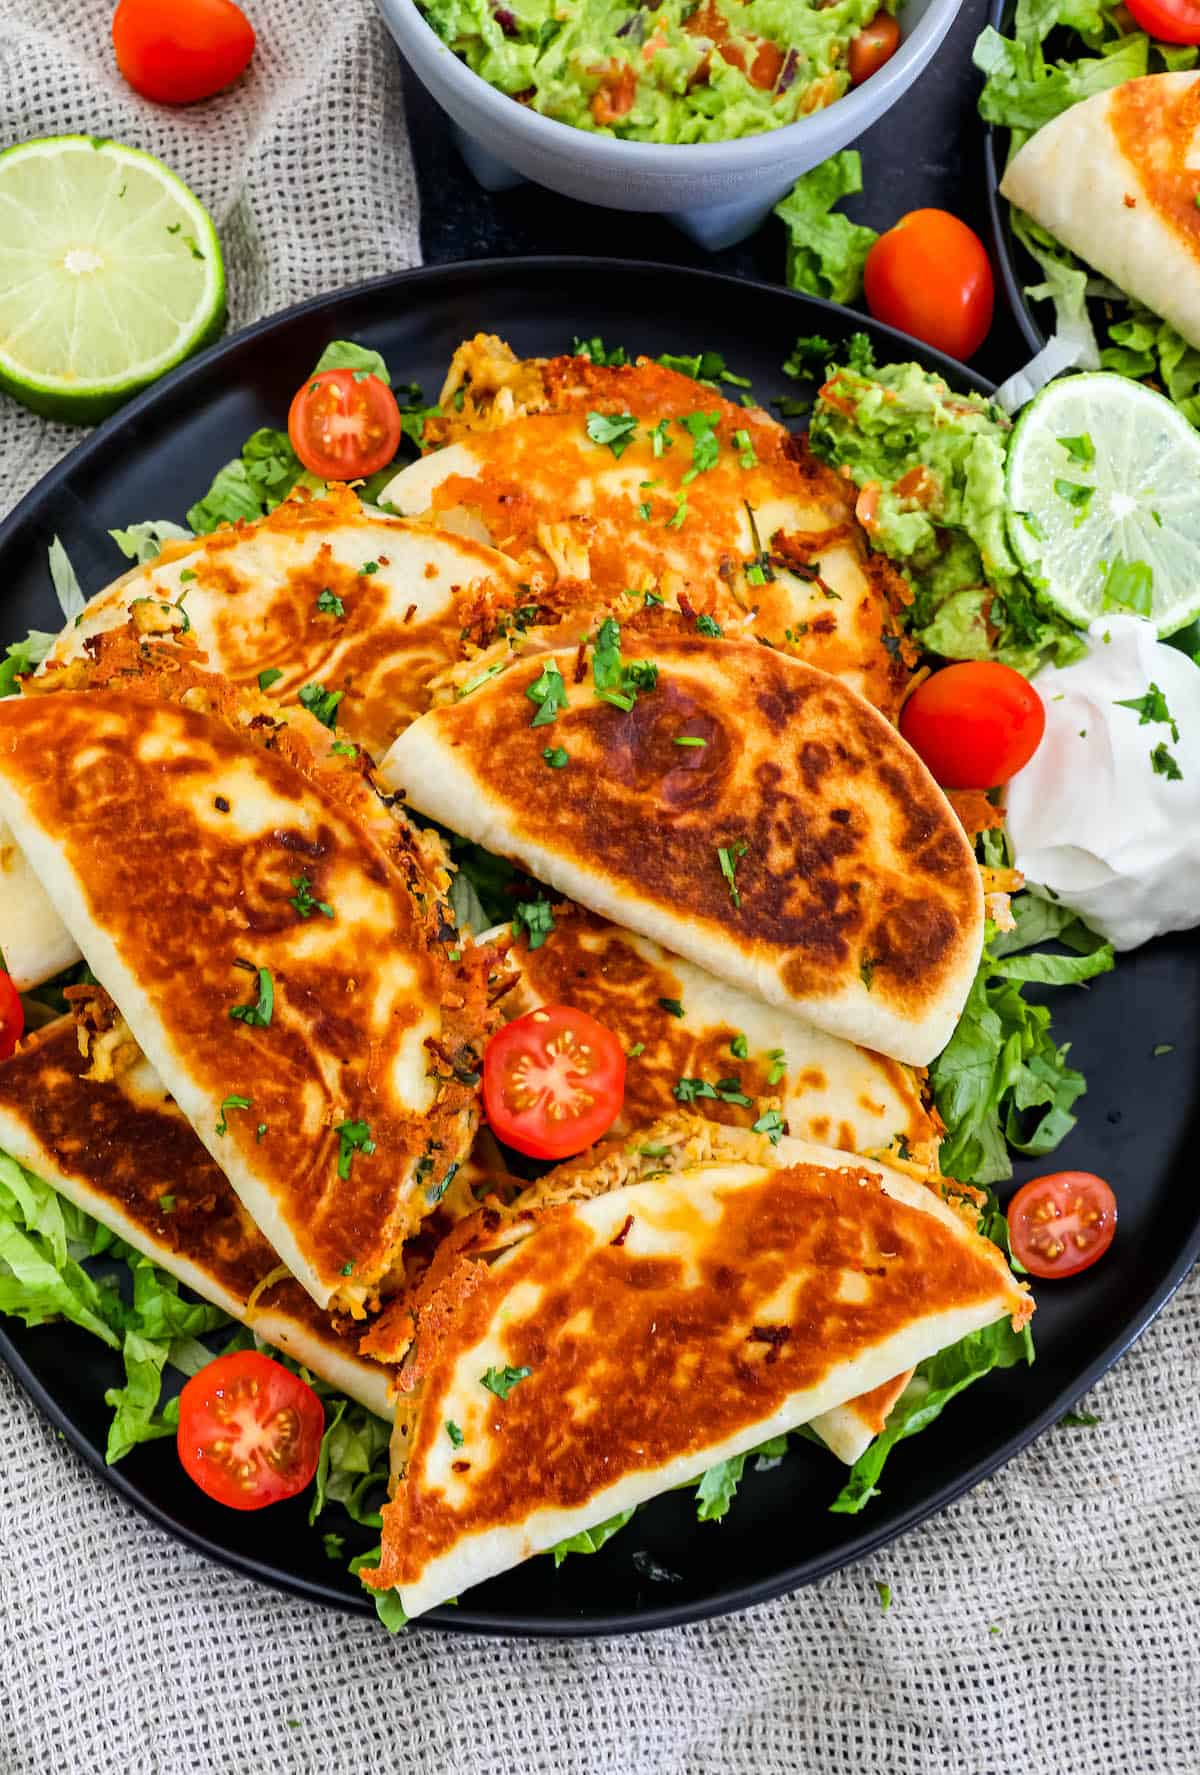 Mini chicken quesadillas on a black plate with tomatoes and guacamole.